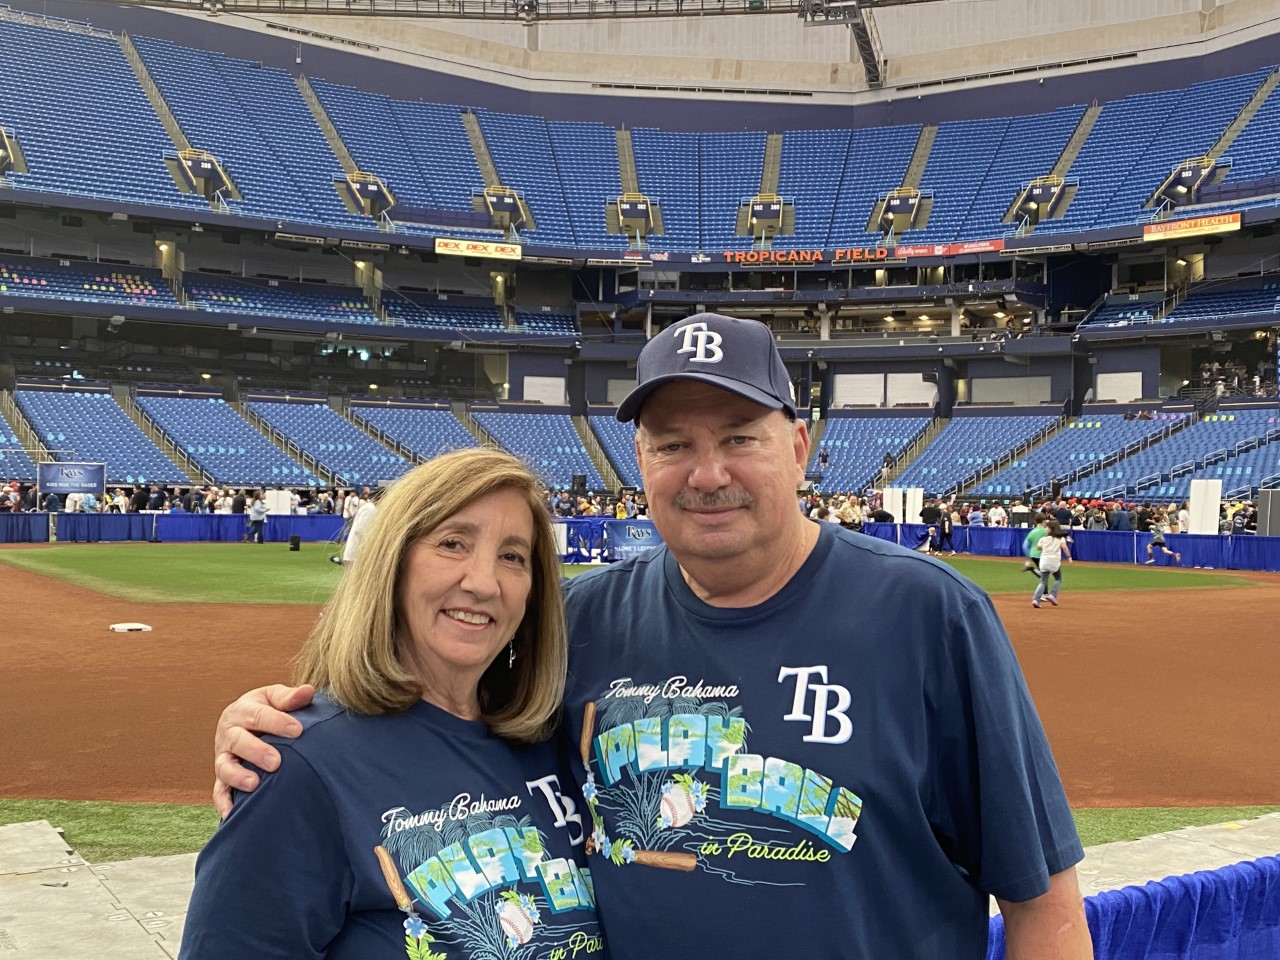 The loyal Rays season ticket holders who have been here from the start